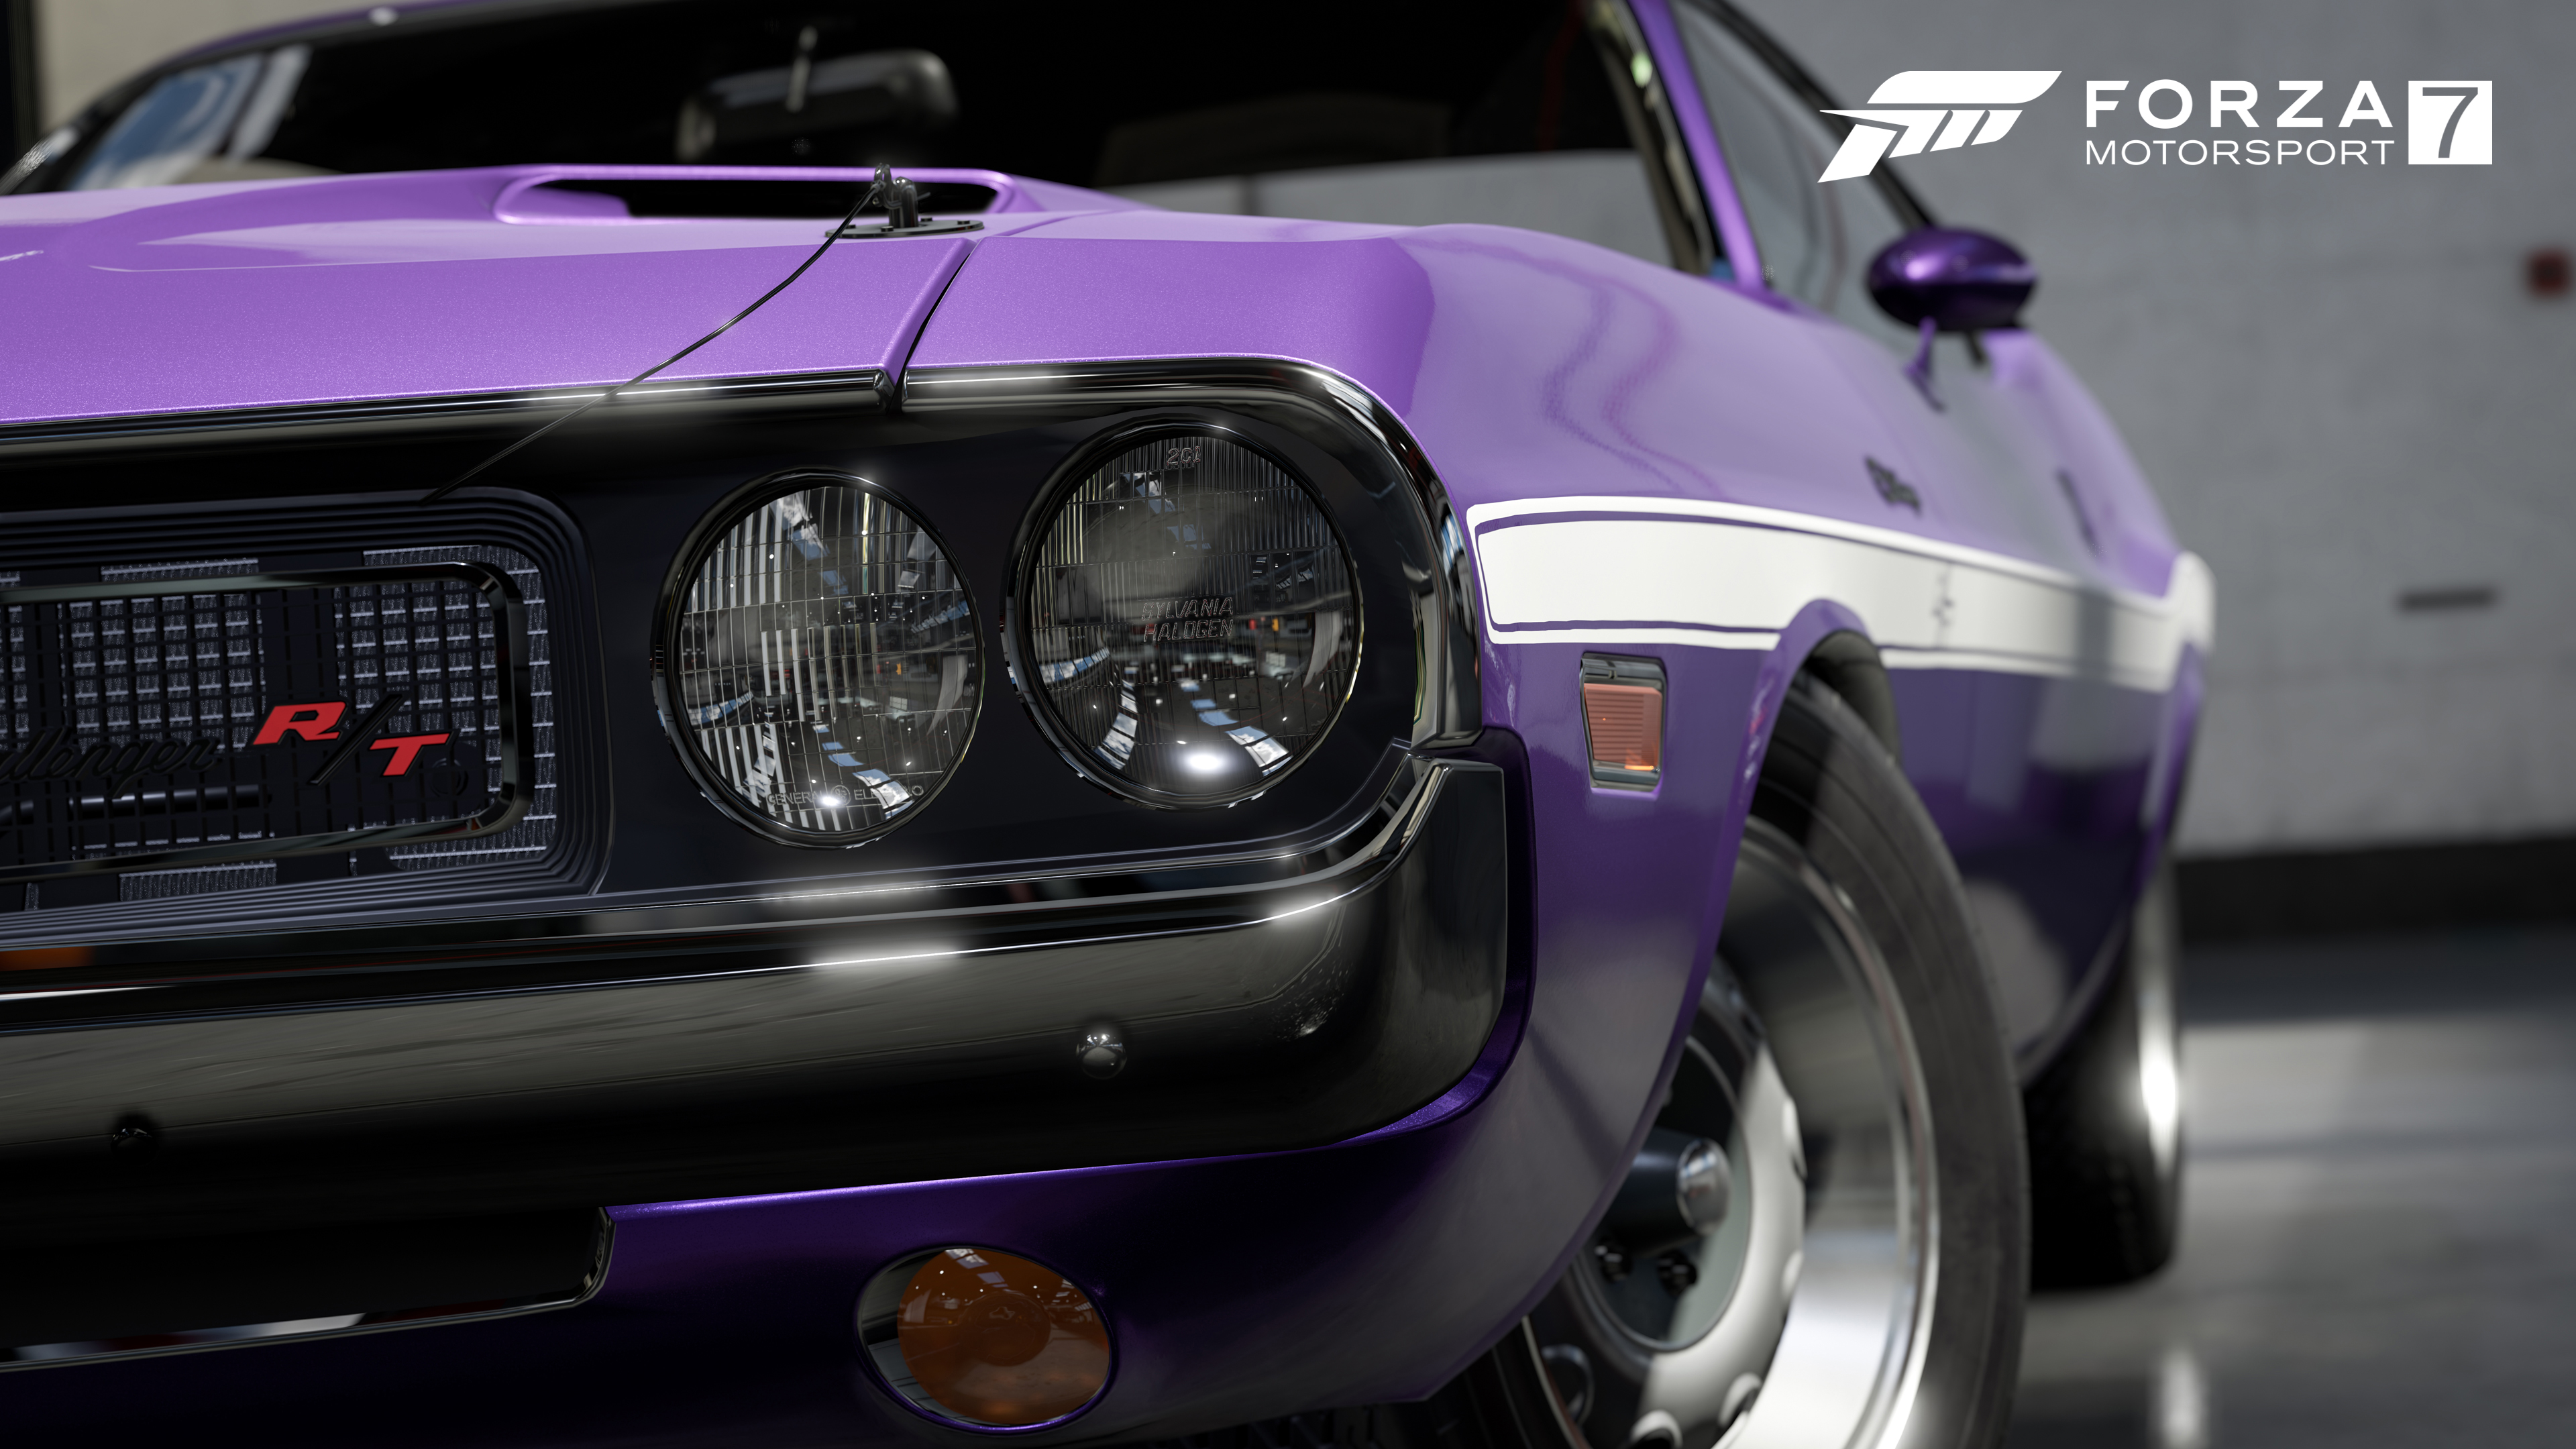 Purple car from Forza 7